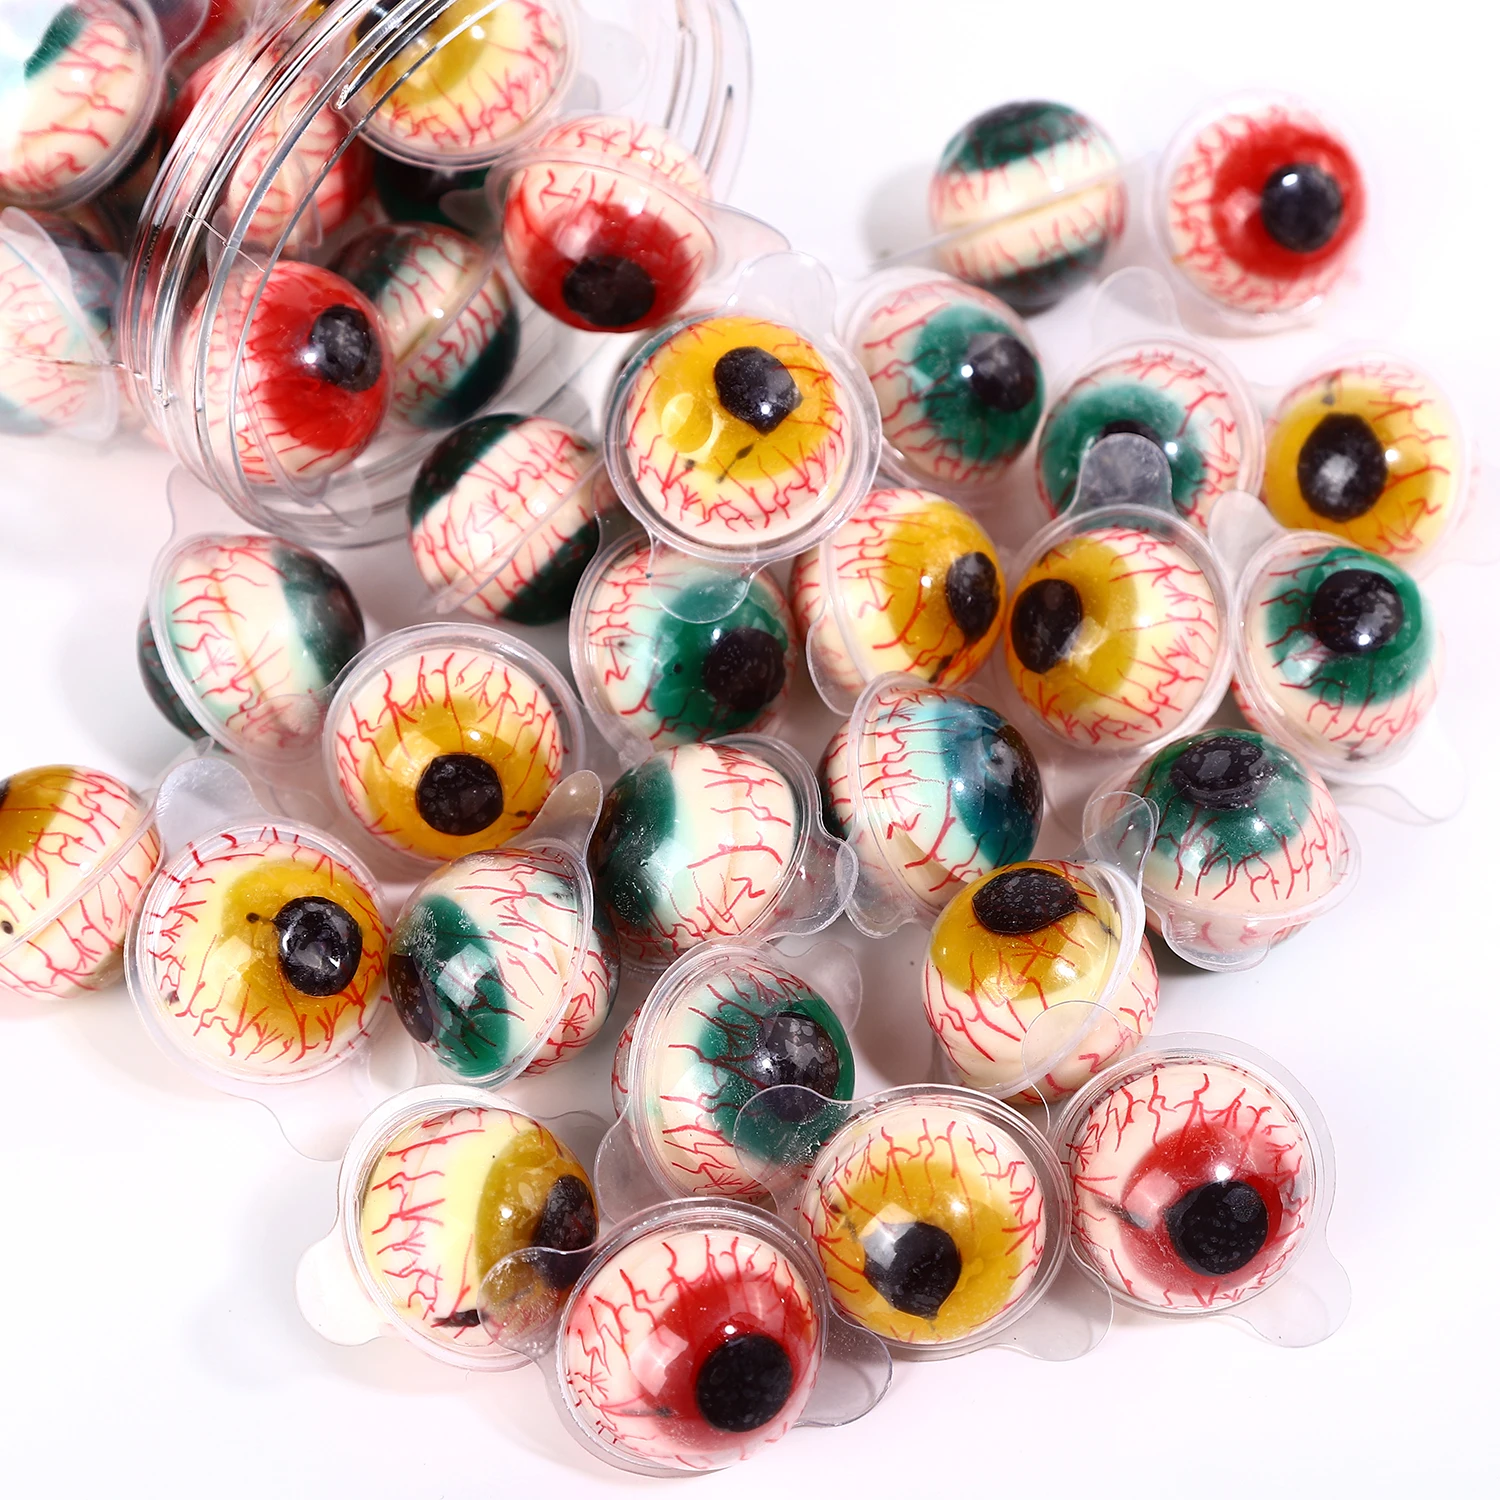 Hot selling candies wholesale import halal earth planet gummies candy gummy eyes jelly sweets confectionery bonbons Soft candy